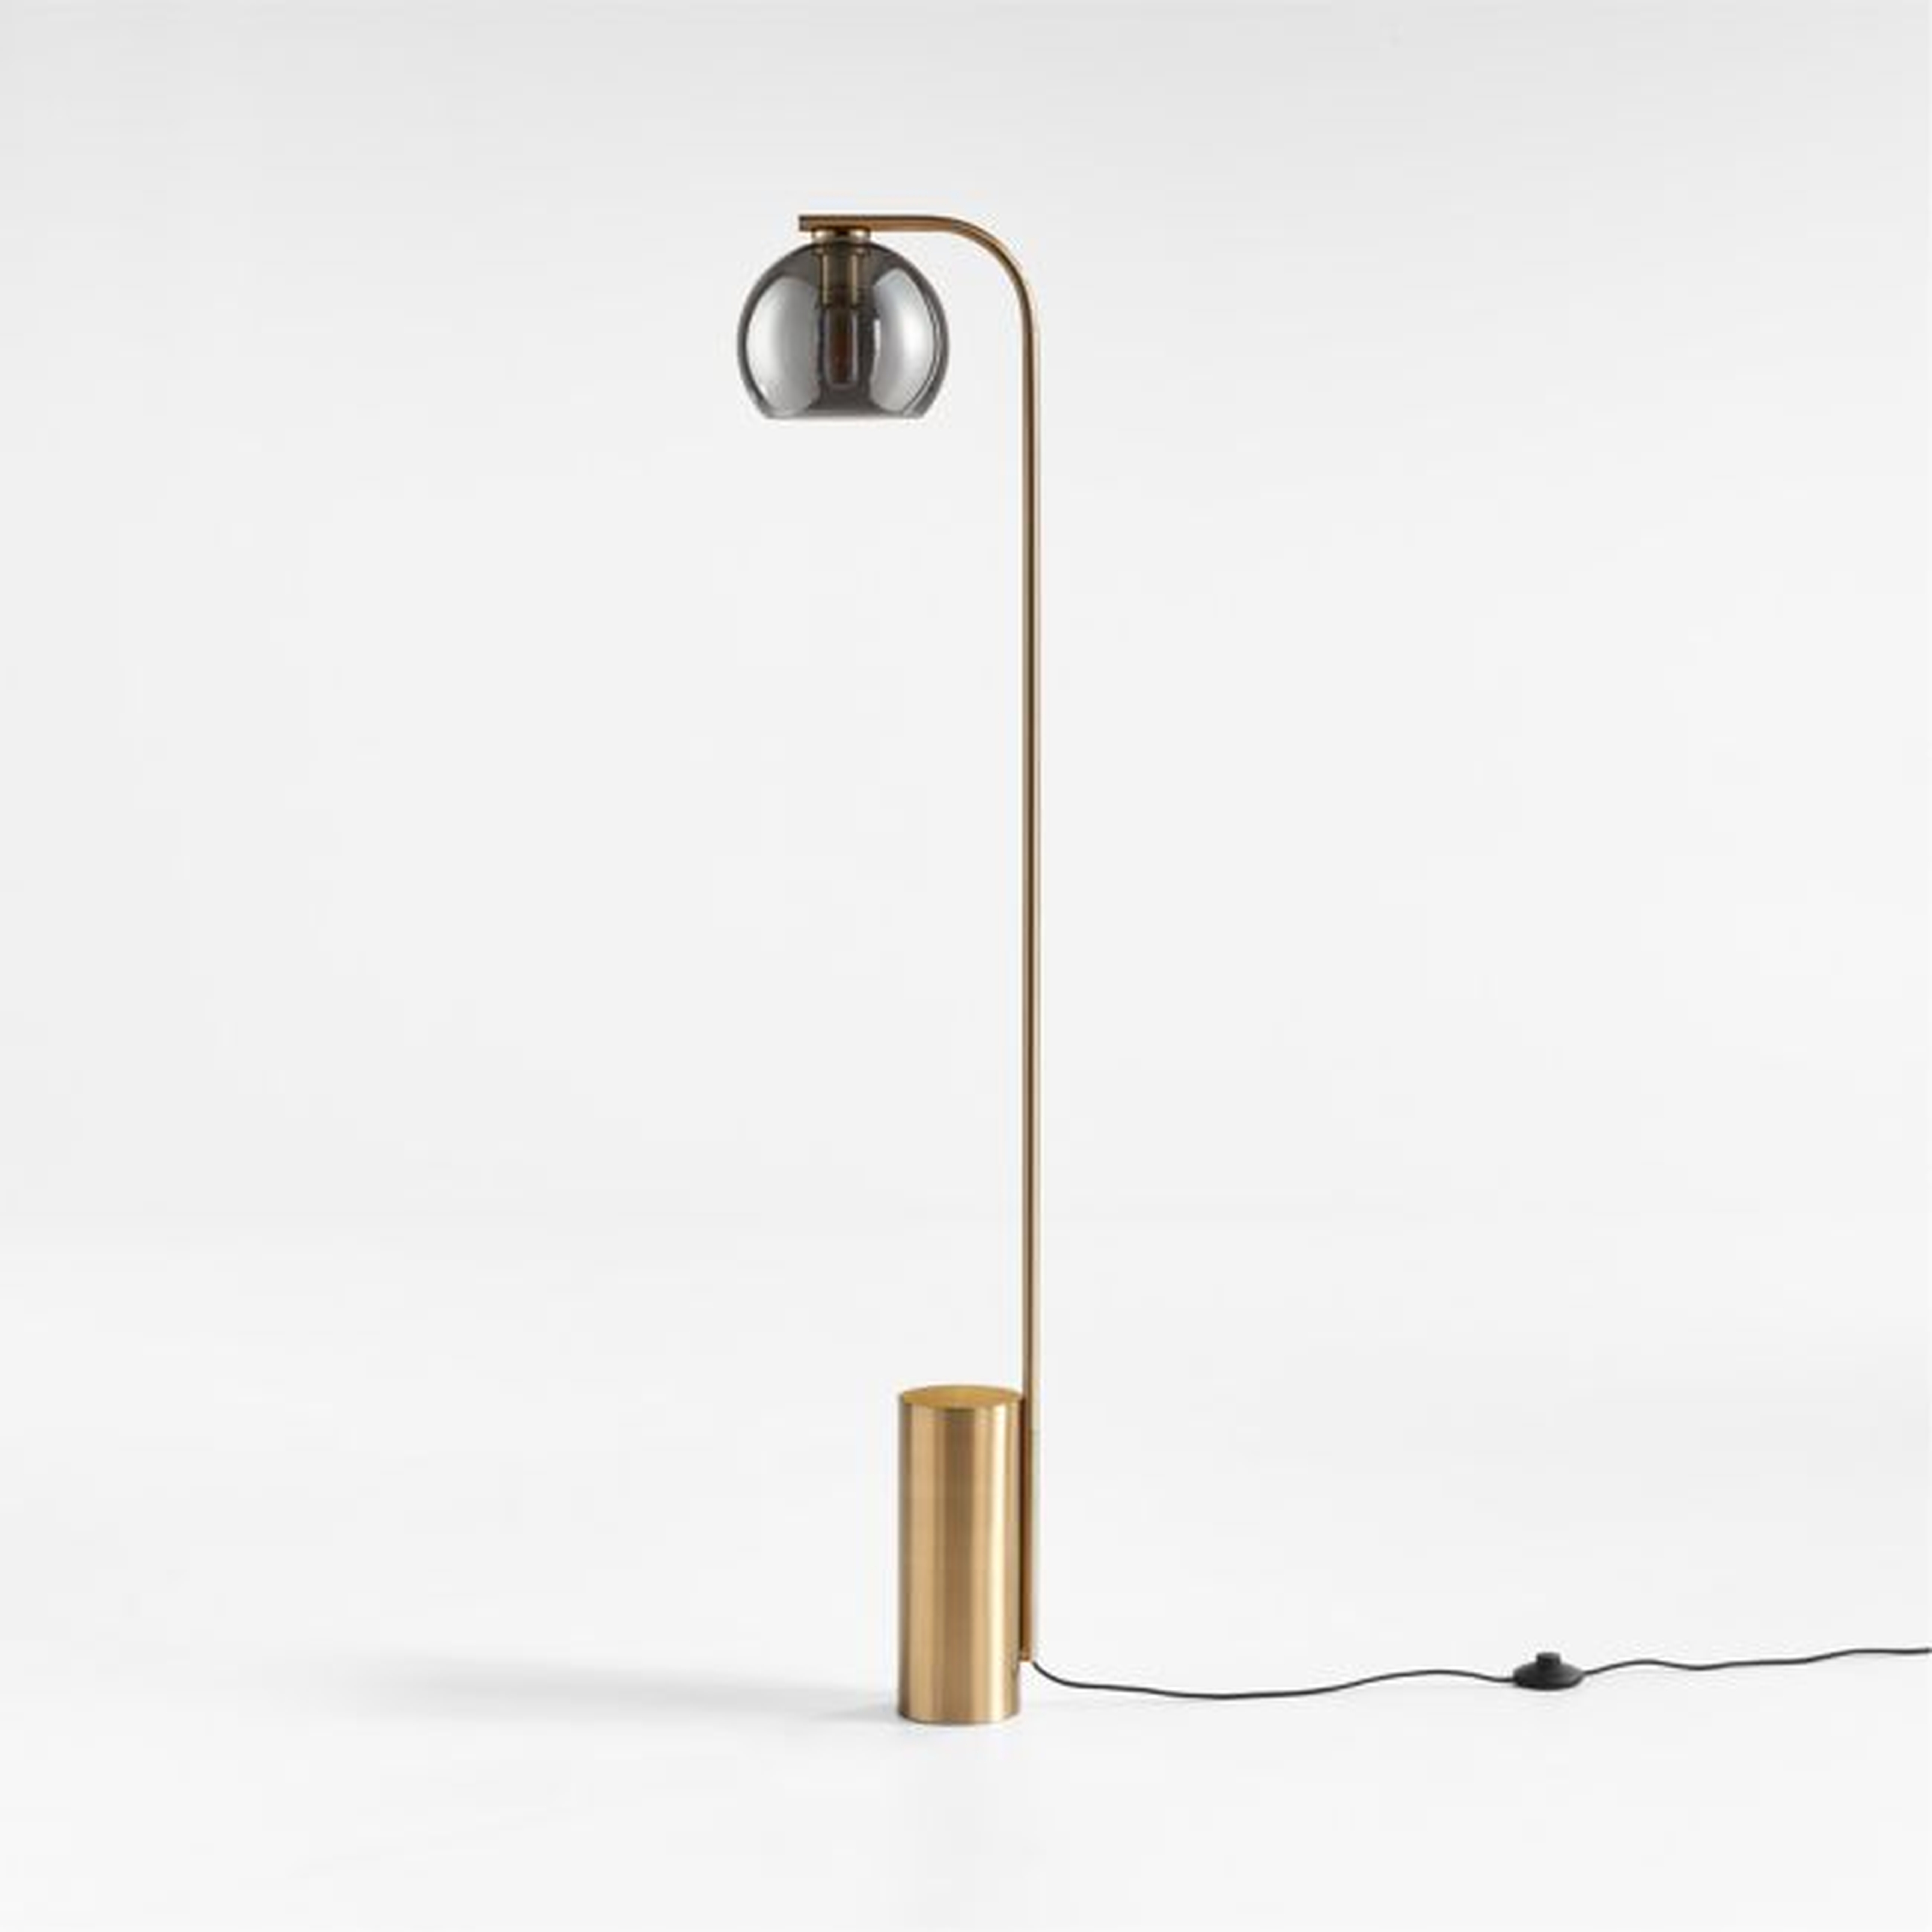 Arren Brass Floor Lamp with Silver Round Shade - Crate and Barrel